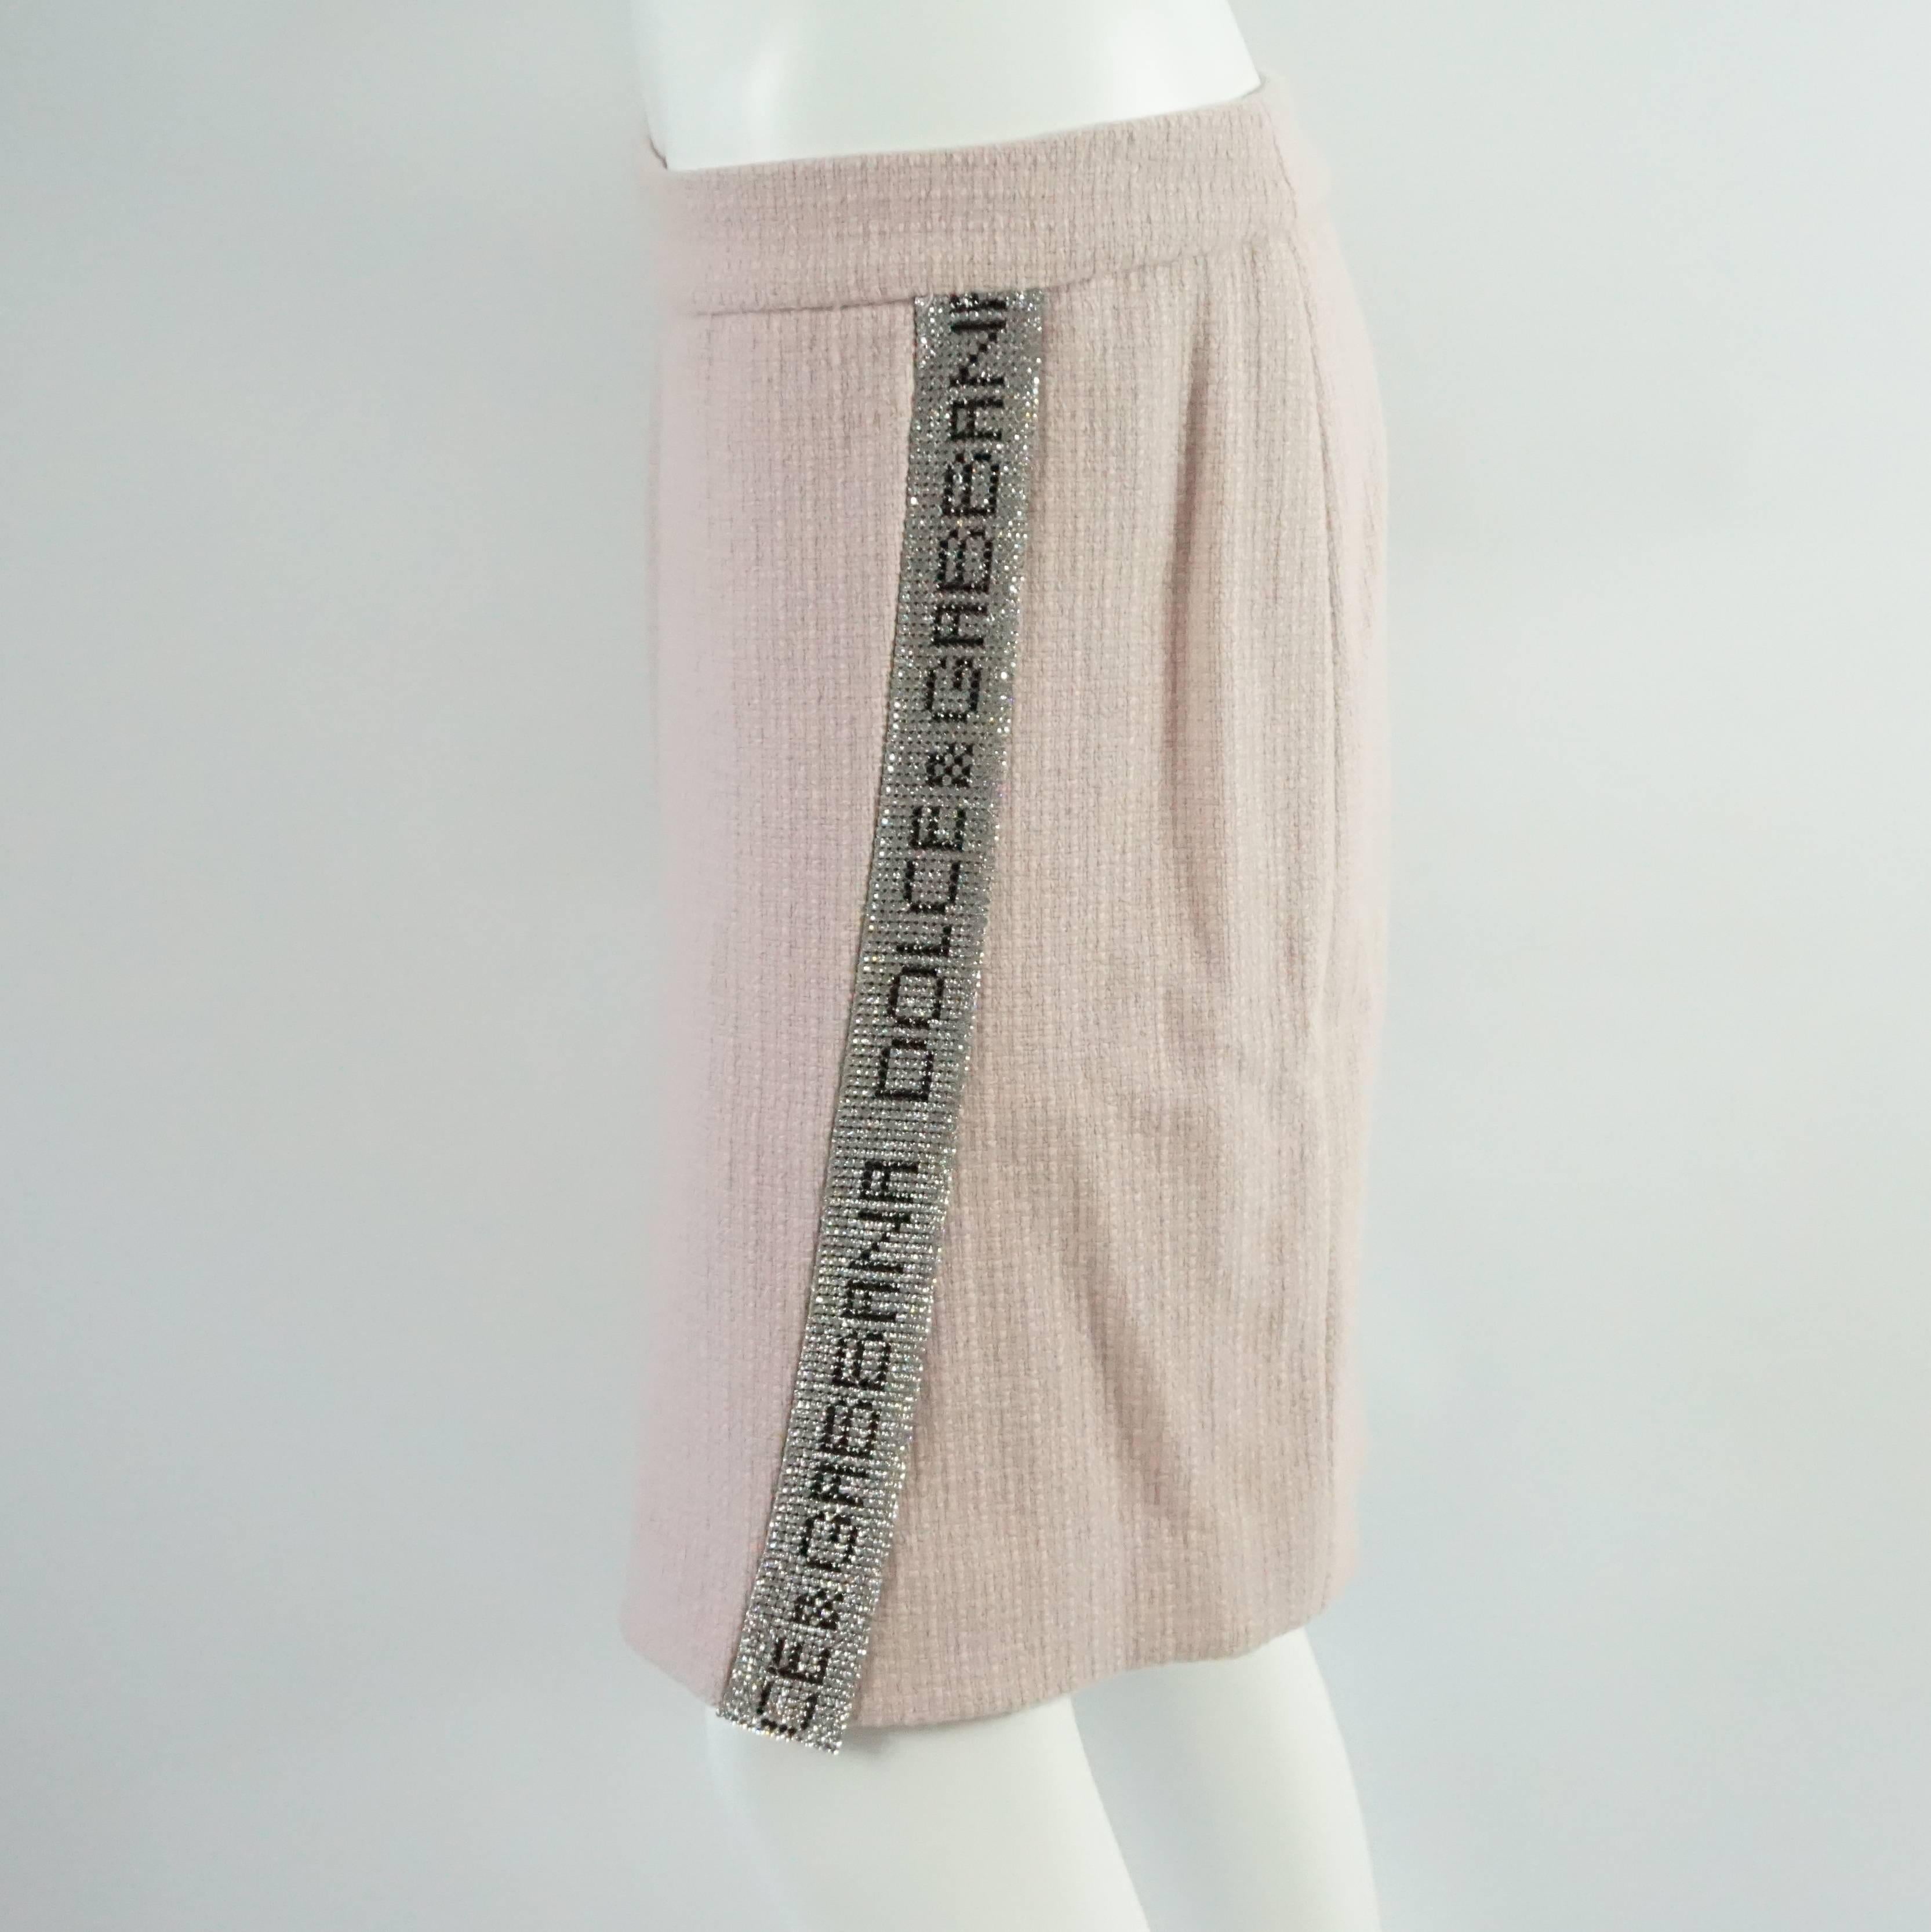 Women's Dolce & Gabbana Pink Tweed Skirt Suit with a Rhinestone Logo Trim - Size 44 For Sale